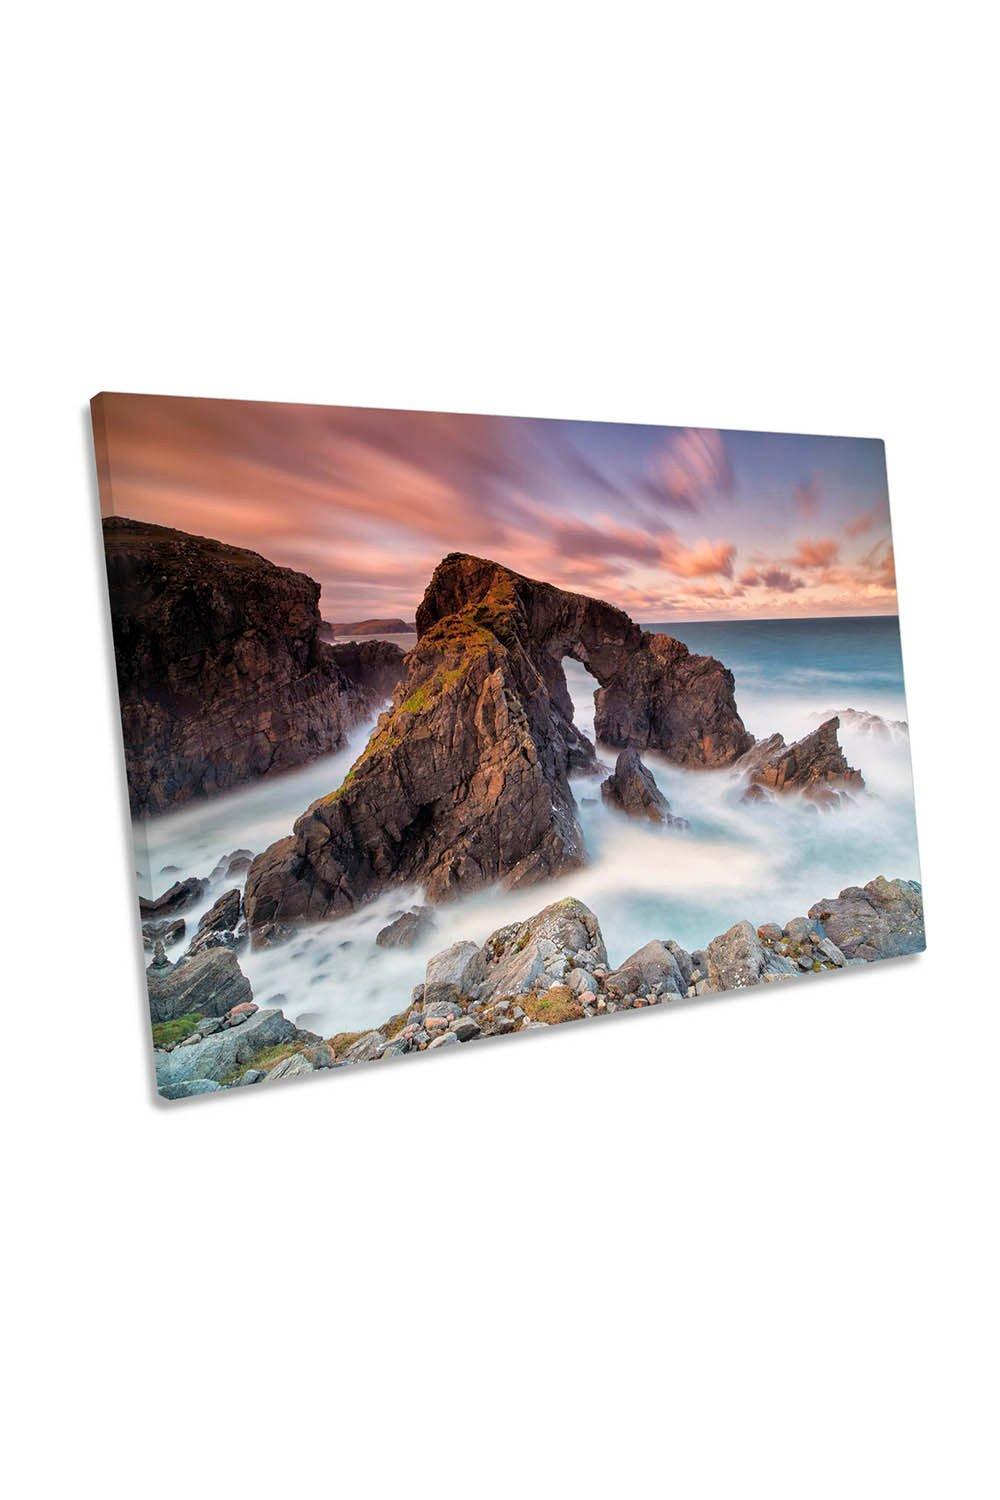 Standing in the Wind Hebridges Arch Scotland Canvas Wall Art Picture Print